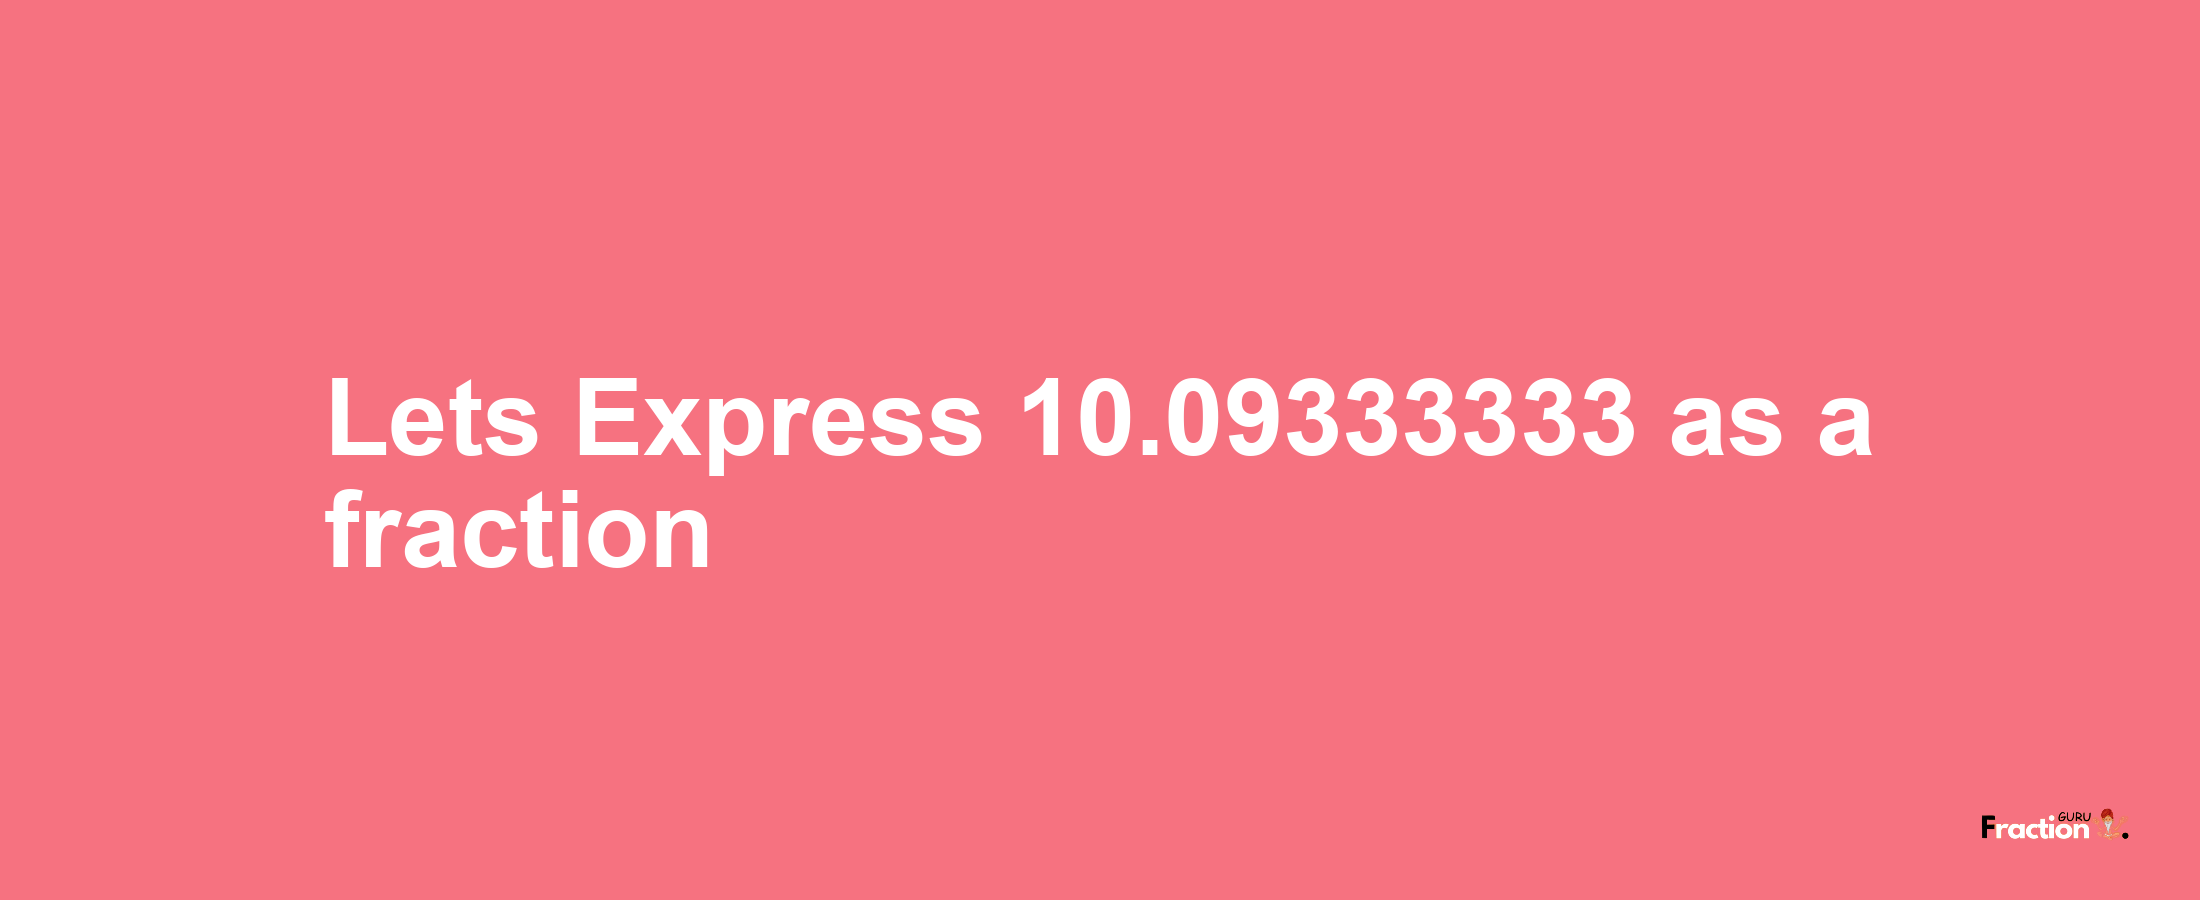 Lets Express 10.09333333 as afraction